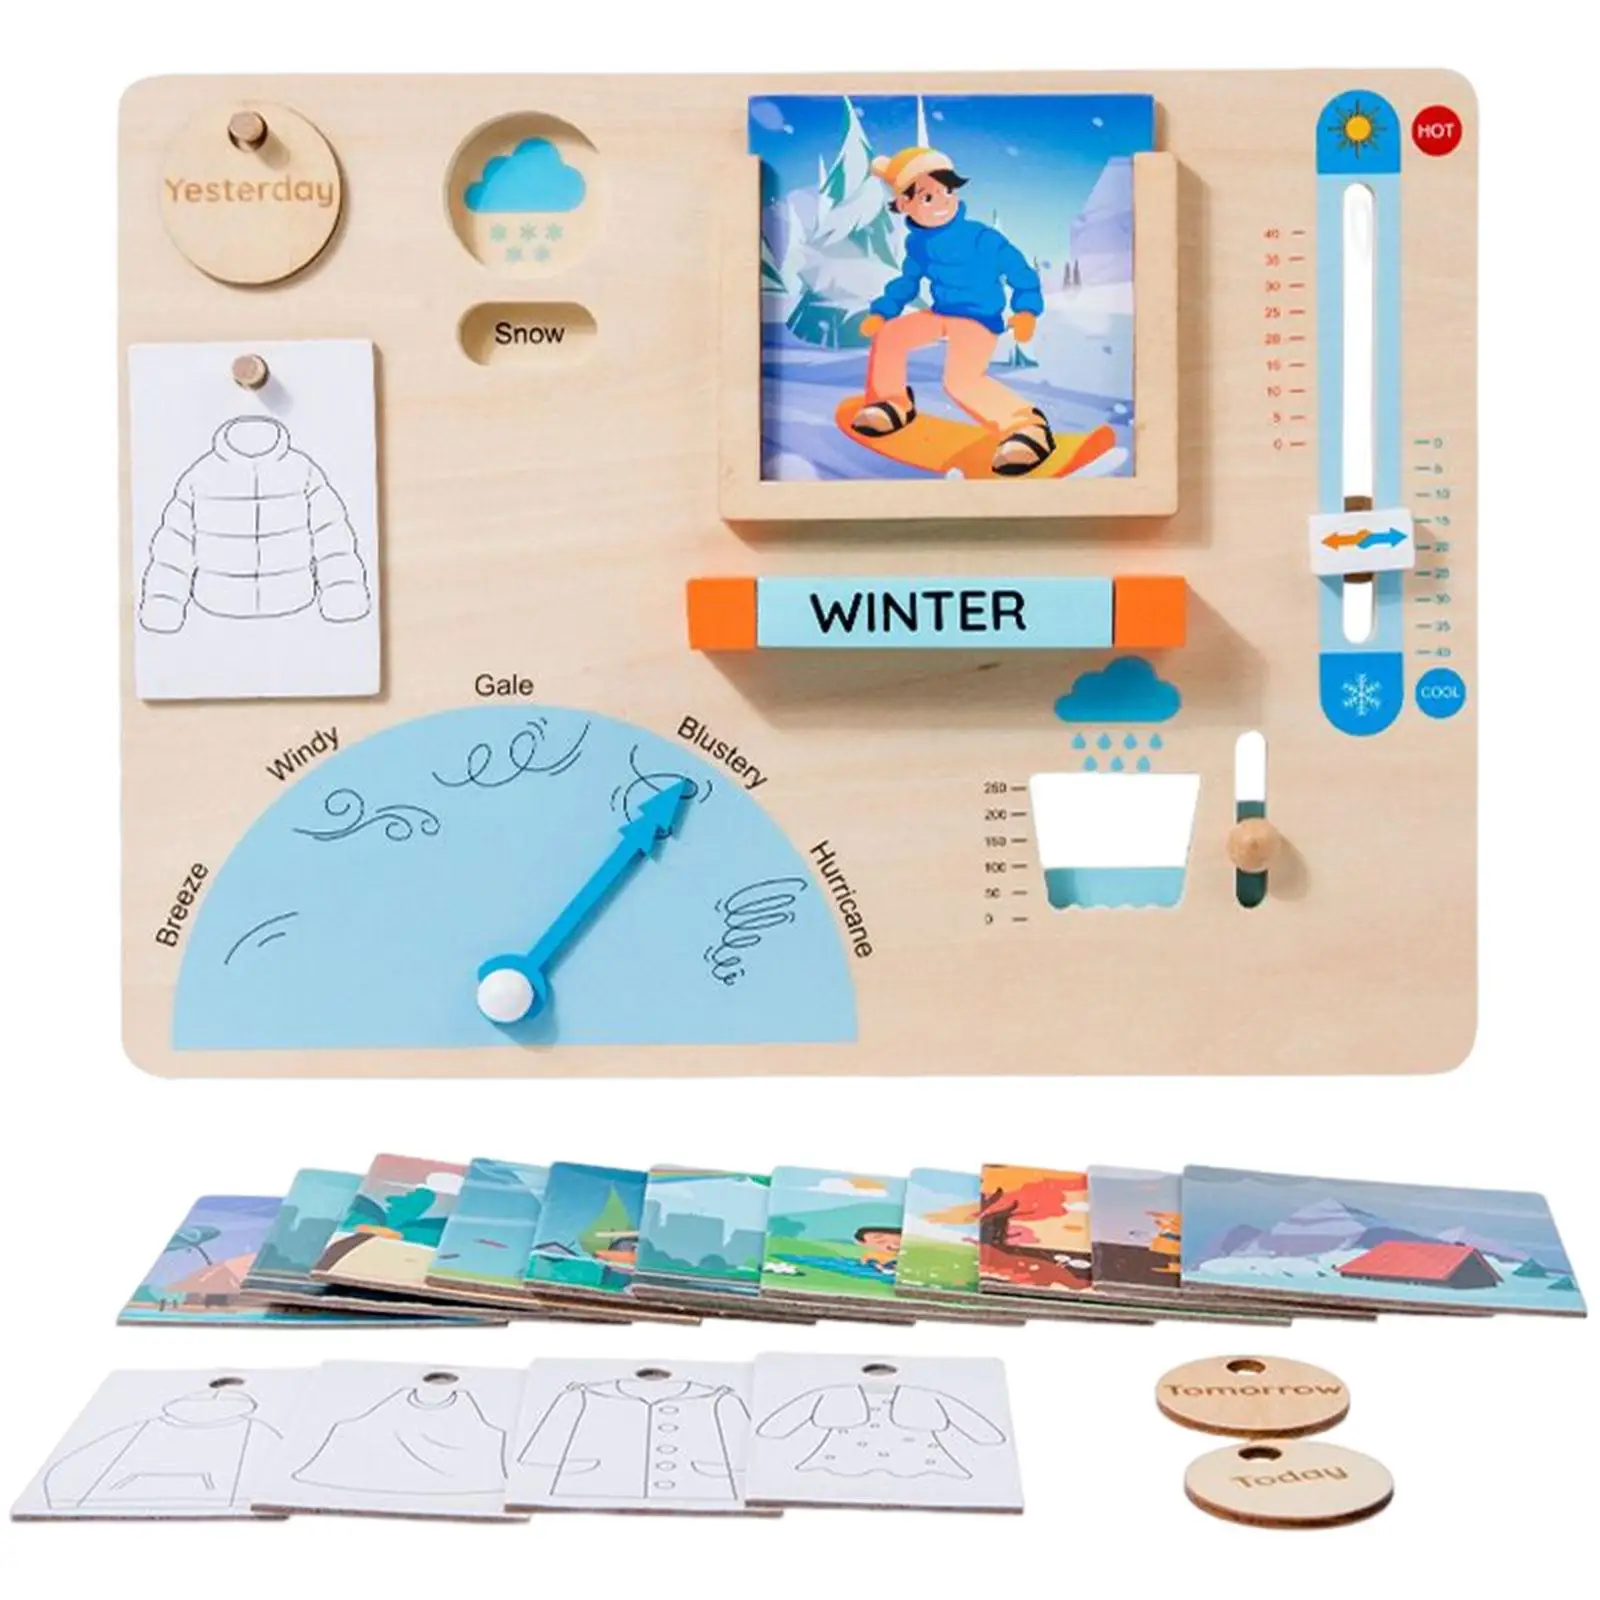 Wooden Weather Board Matching Game Intellectual Development for Xmas Gifts